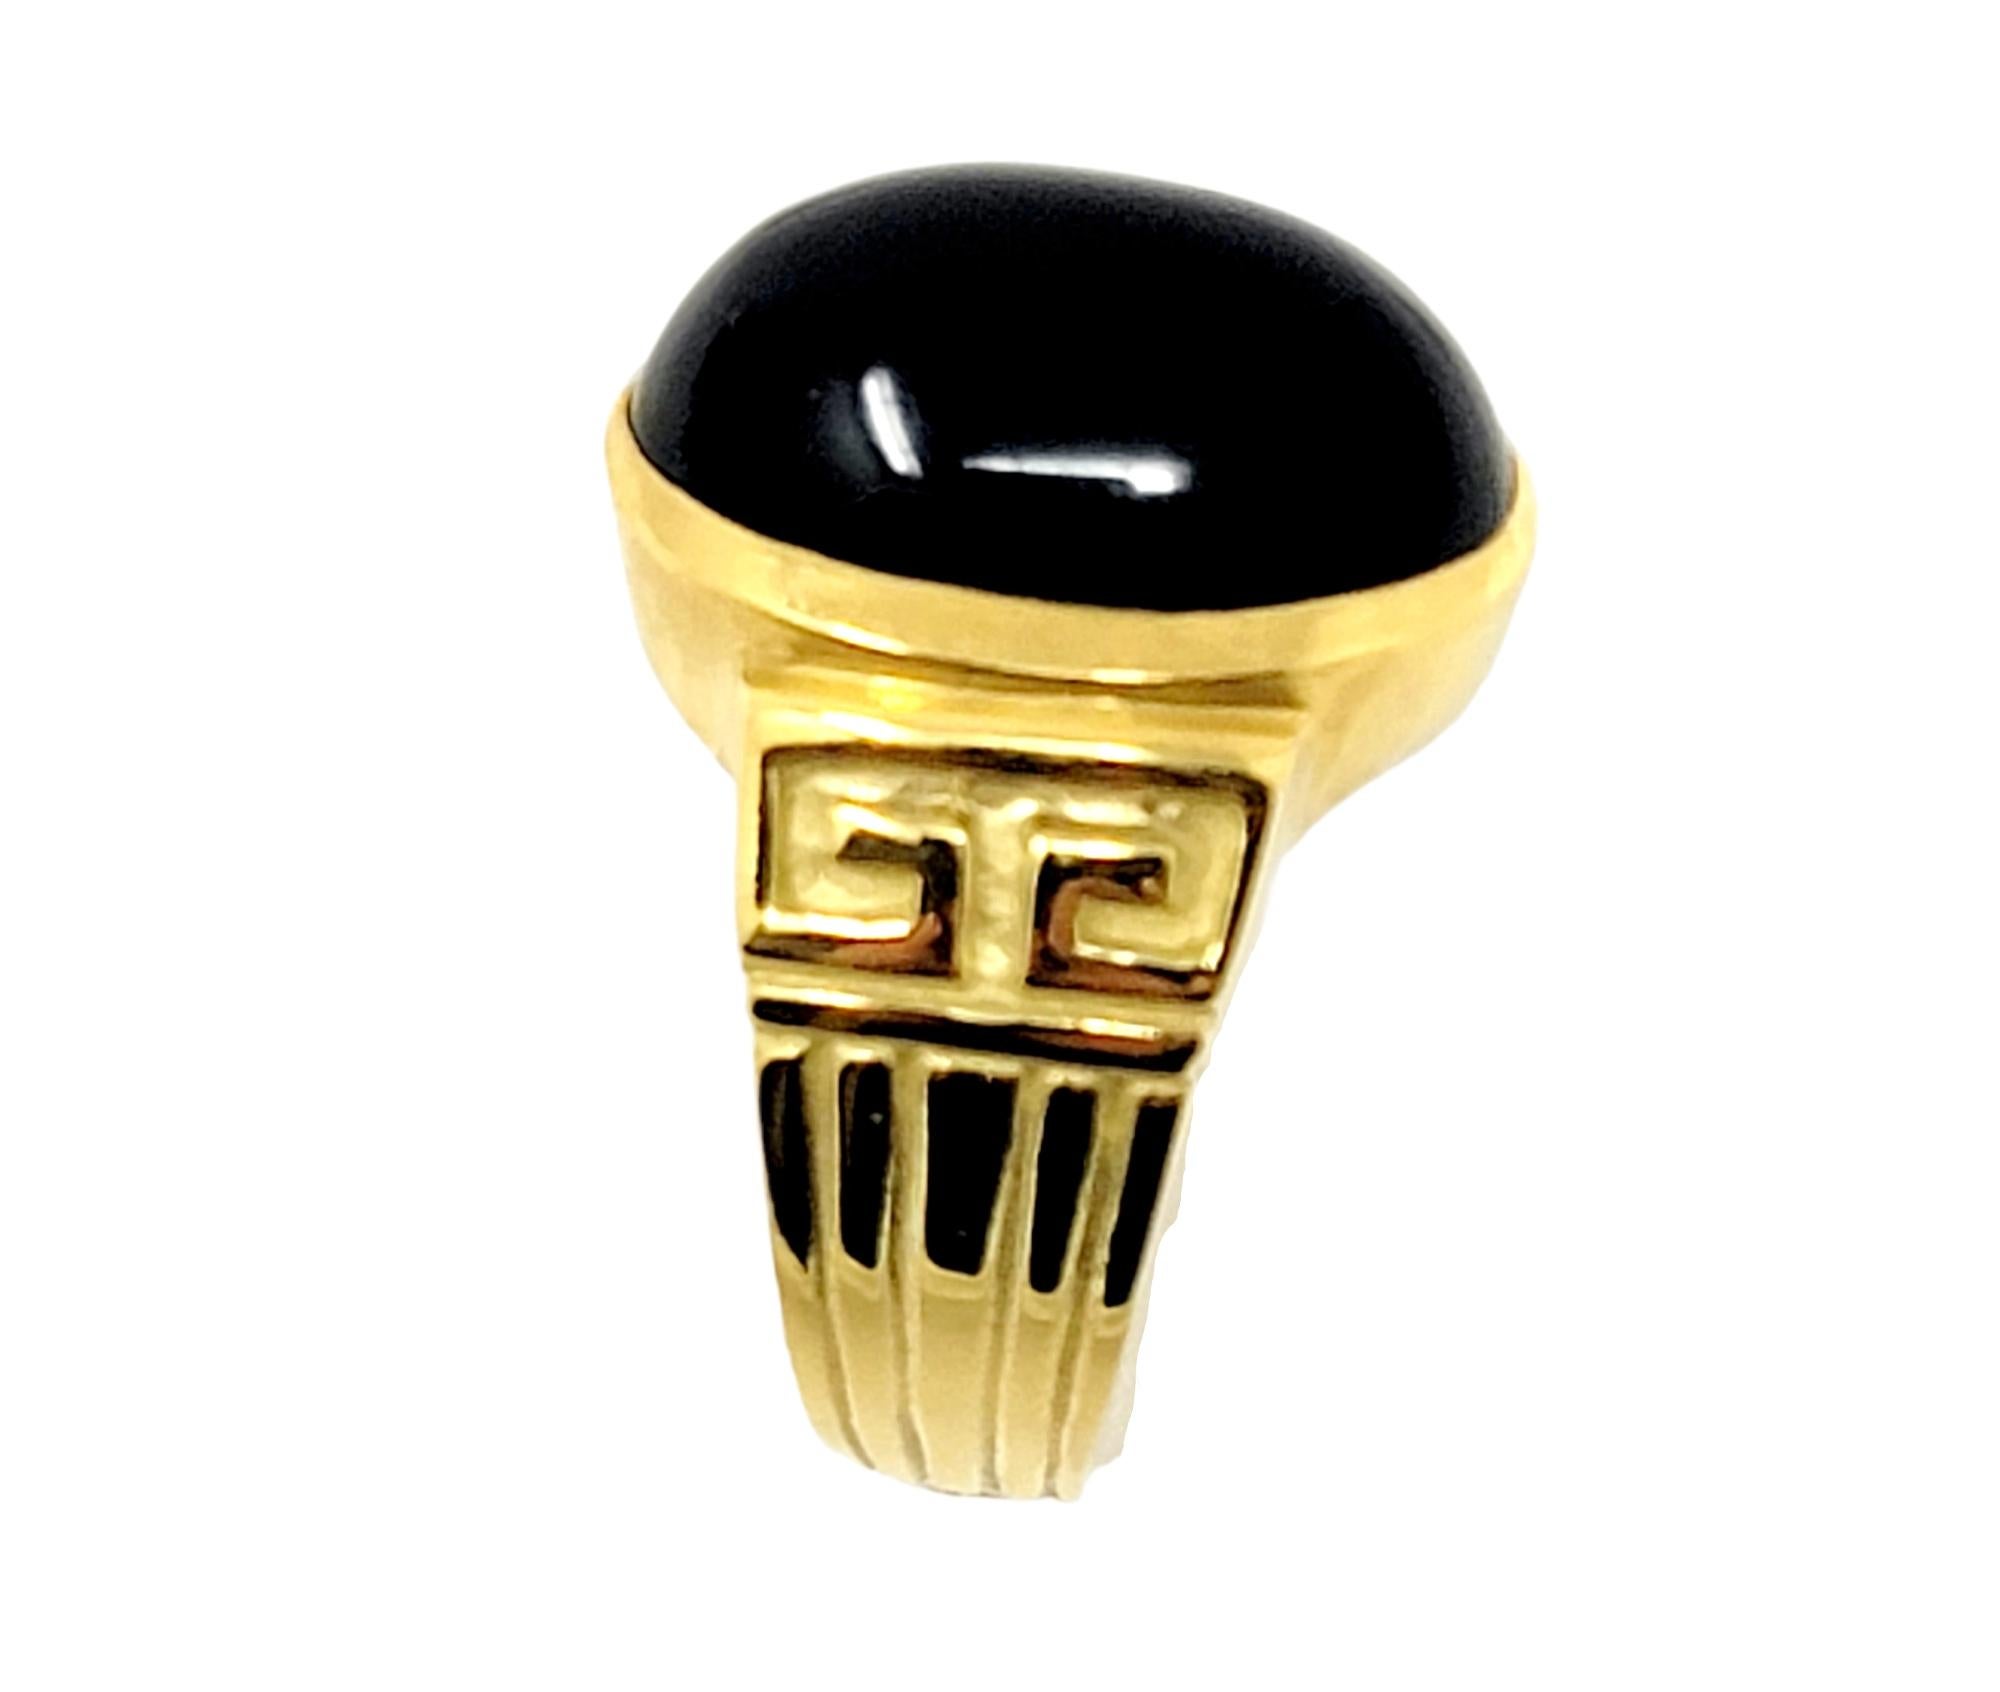 Black Cabochon Oval Onyx Ring in 18 Karat Yellow Gold Bold Wide Design In Good Condition For Sale In Scottsdale, AZ